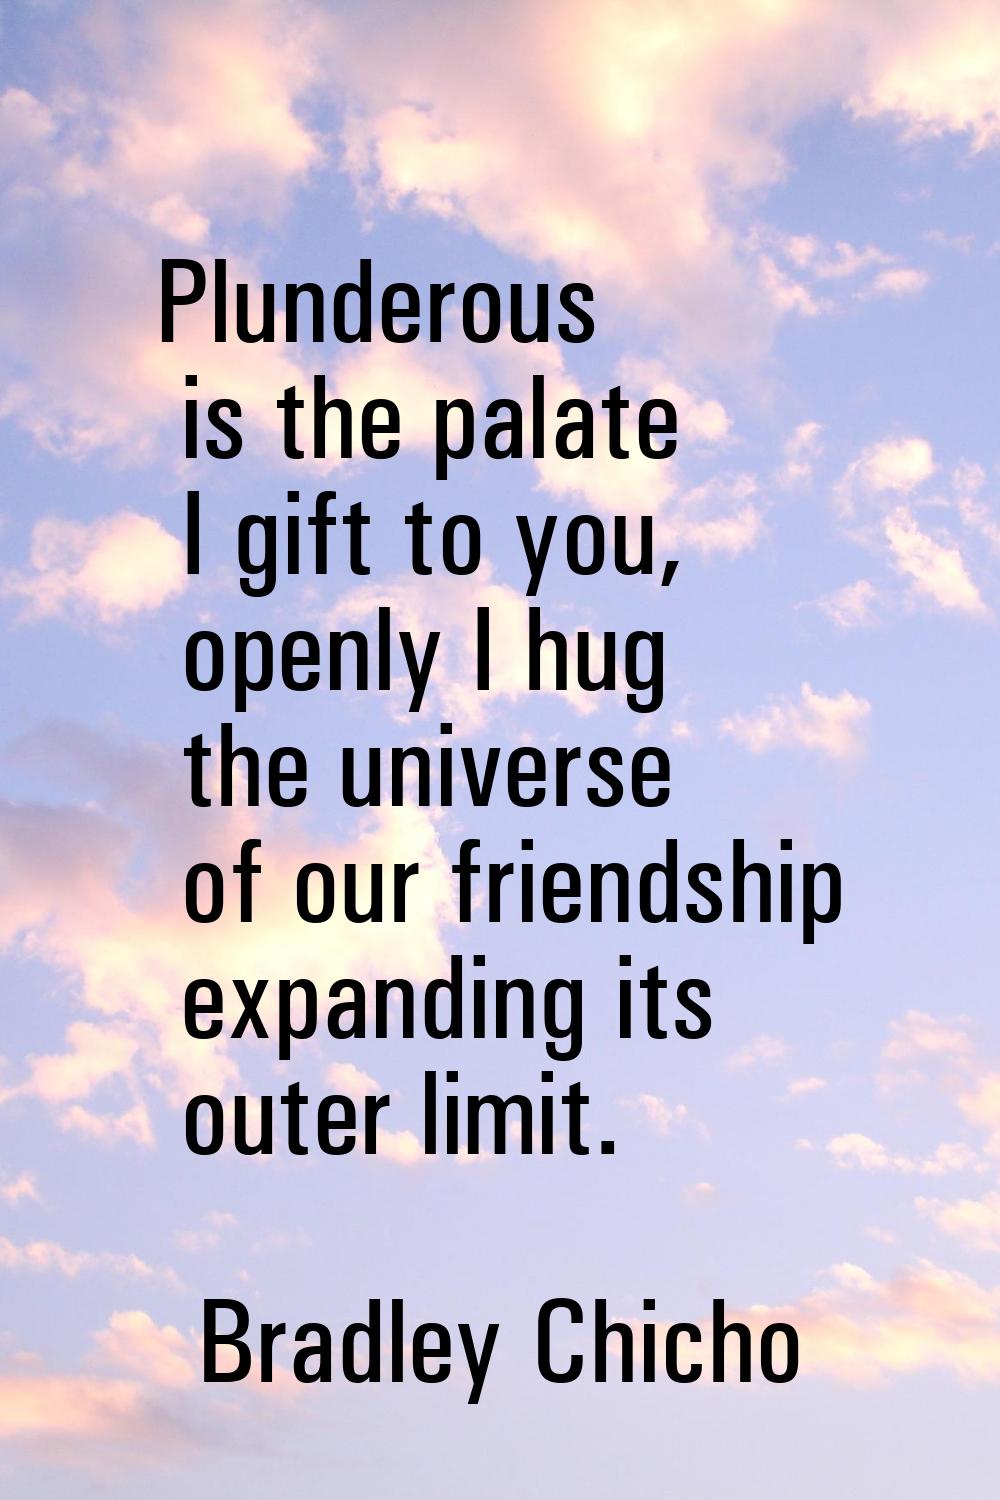 Plunderous is the palate I gift to you, openly I hug the universe of our friendship expanding its o